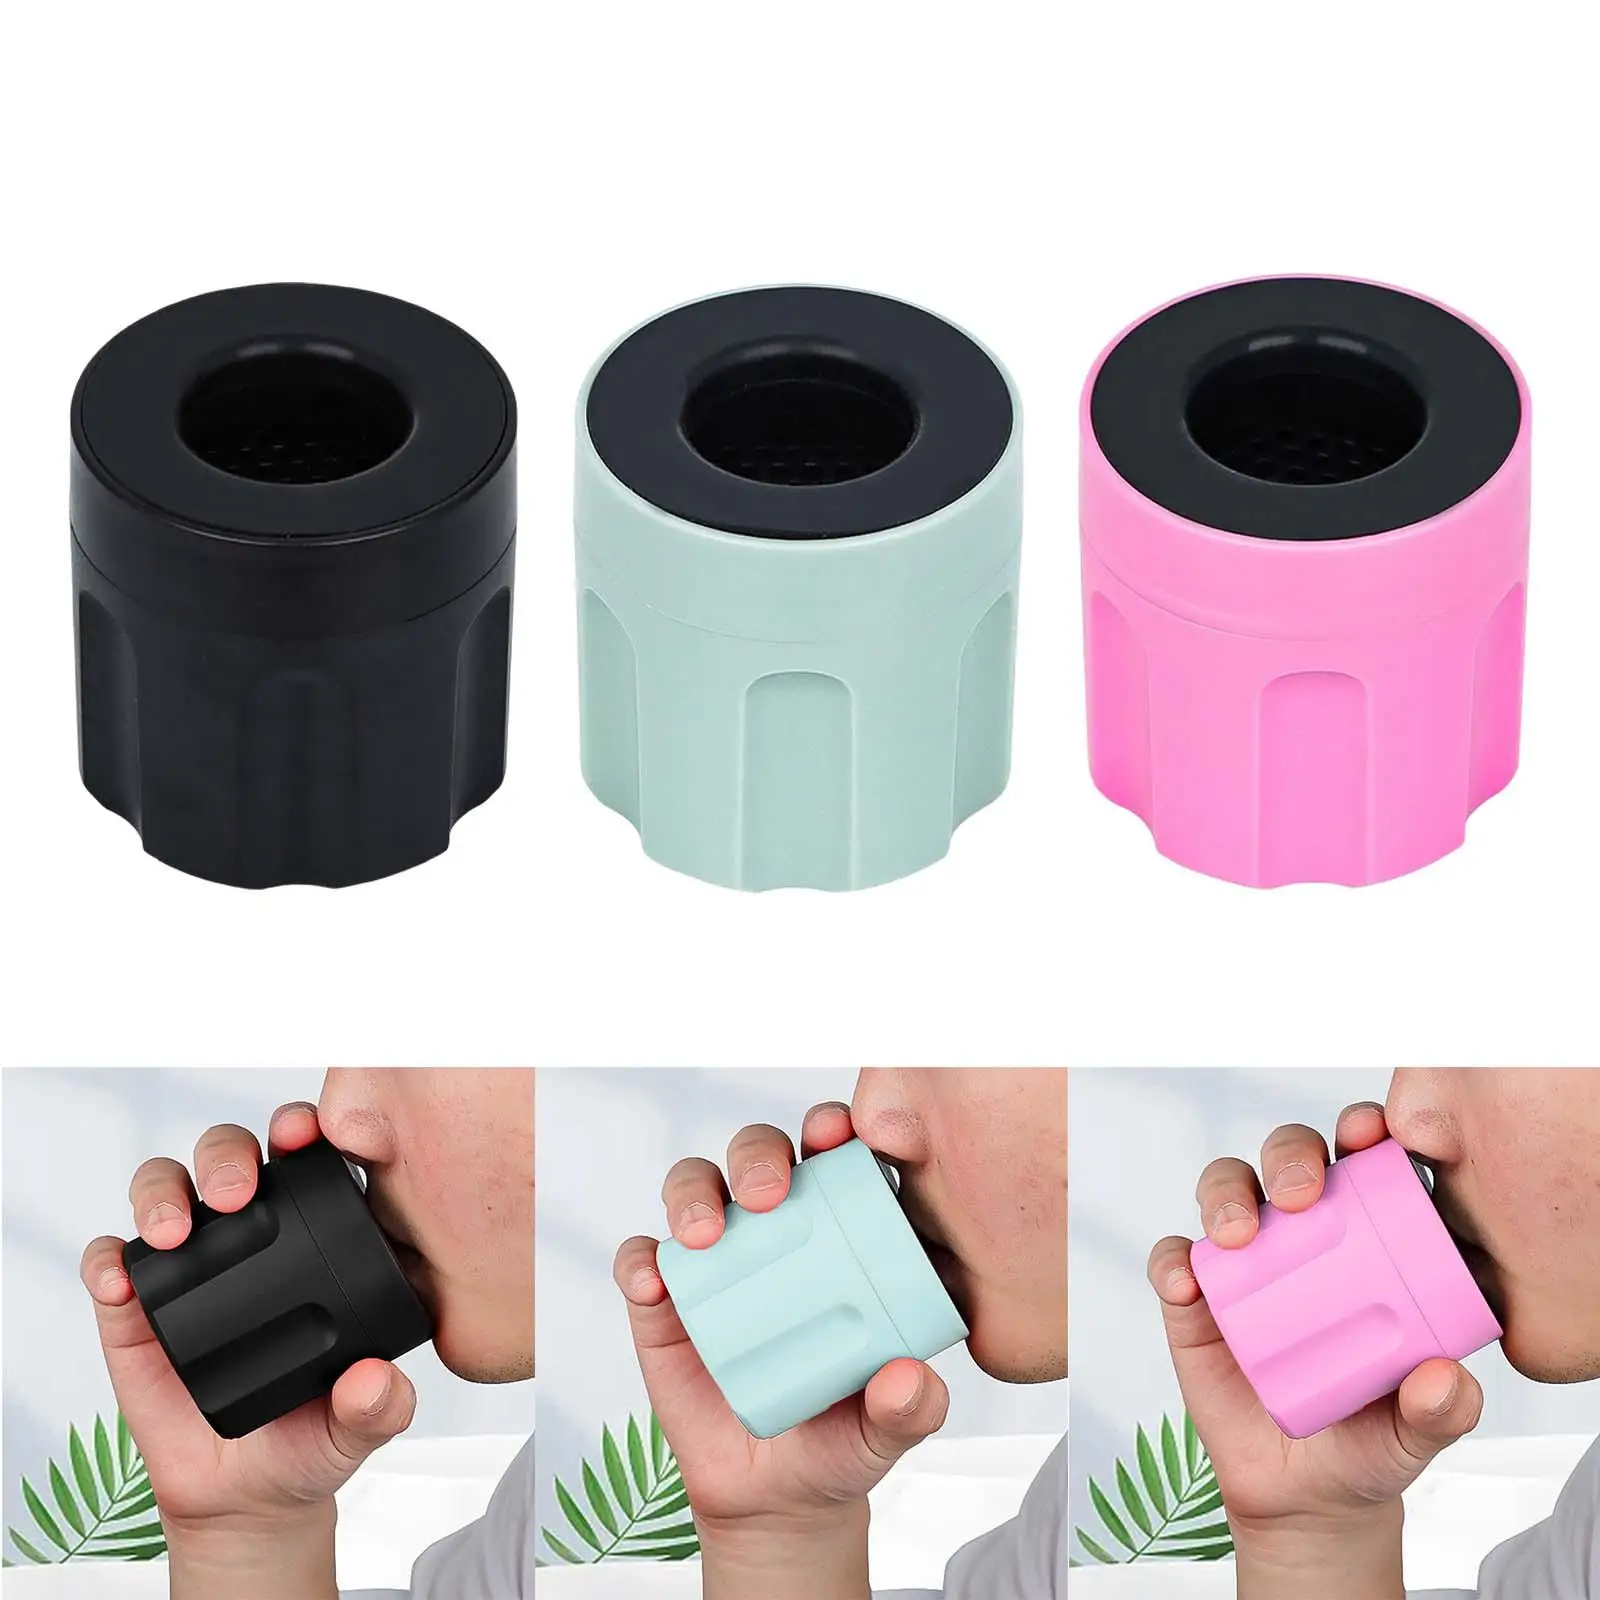 Filter Mini Breathable Mesh Portable Personal Air Filter Accessories